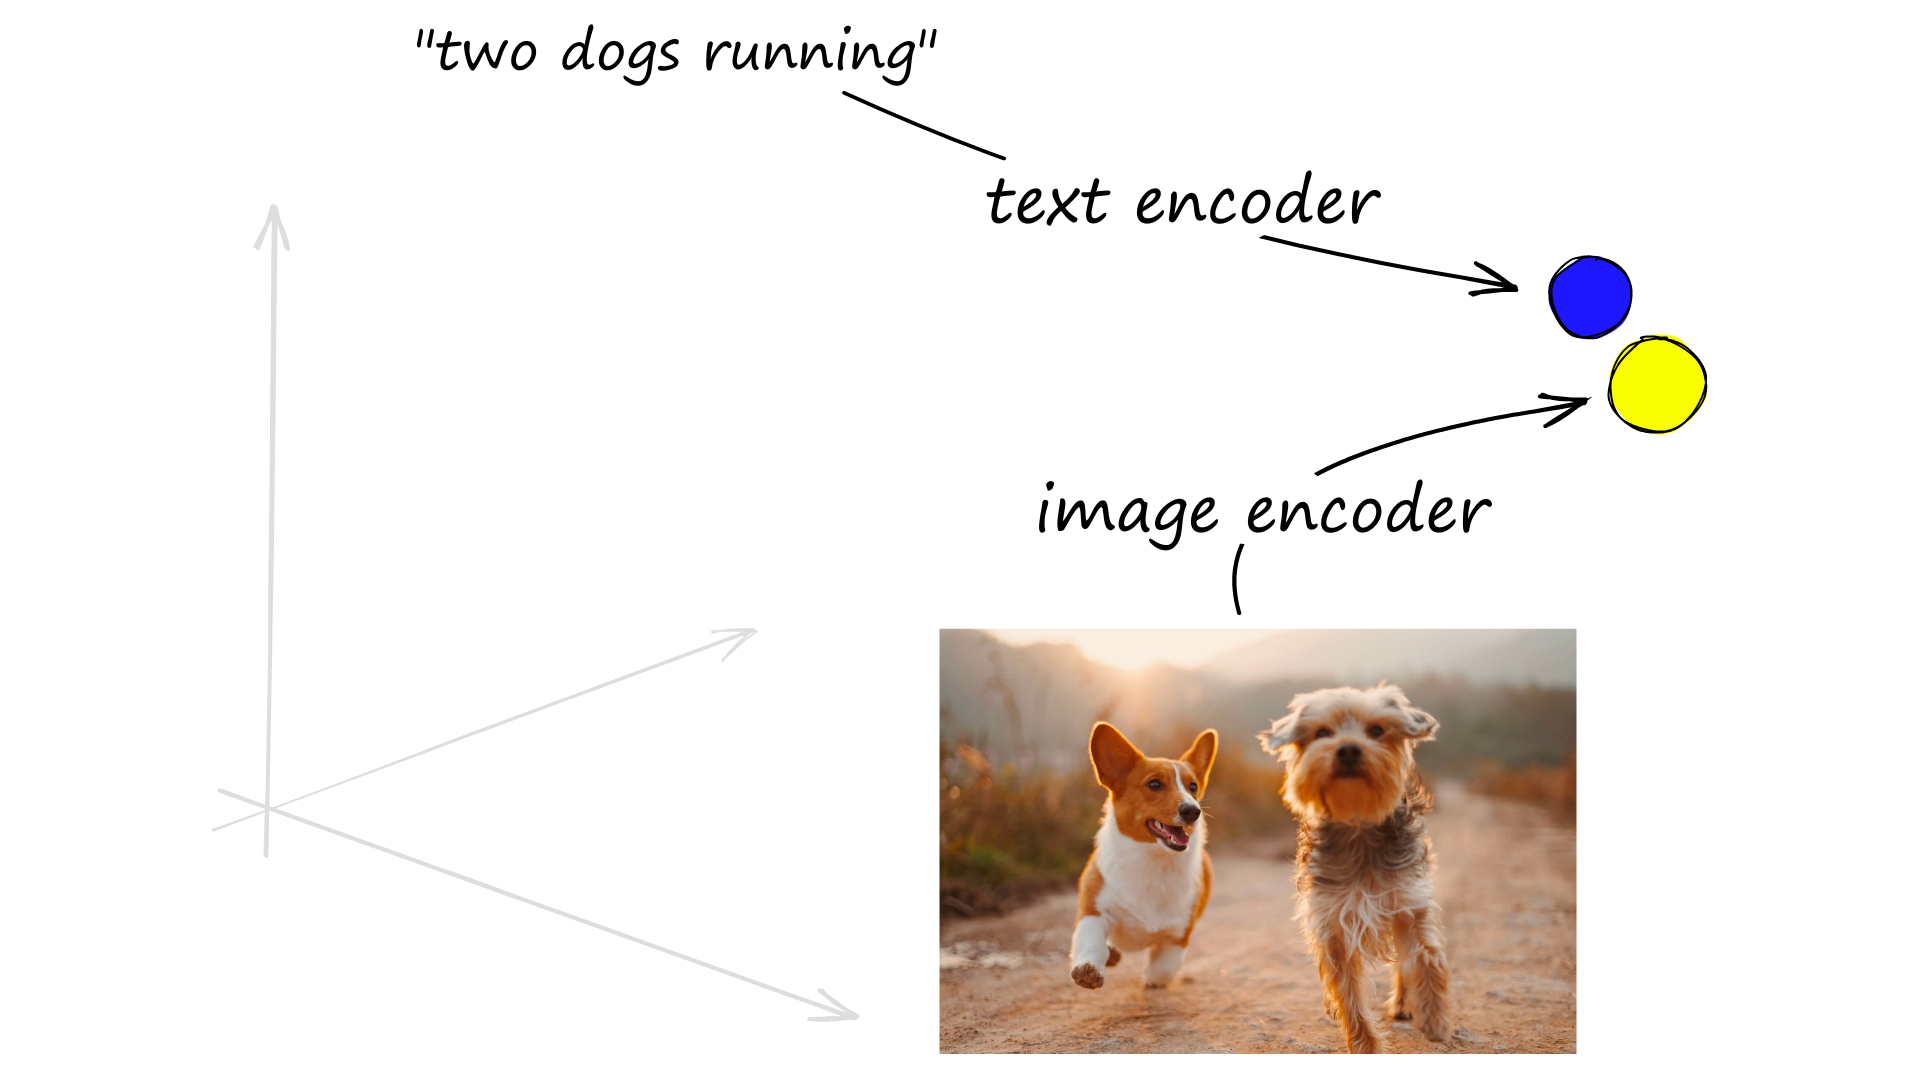 Using specific text and image encoders, we can encode text and images to the same vector space. Photo credit Alvan Nee.